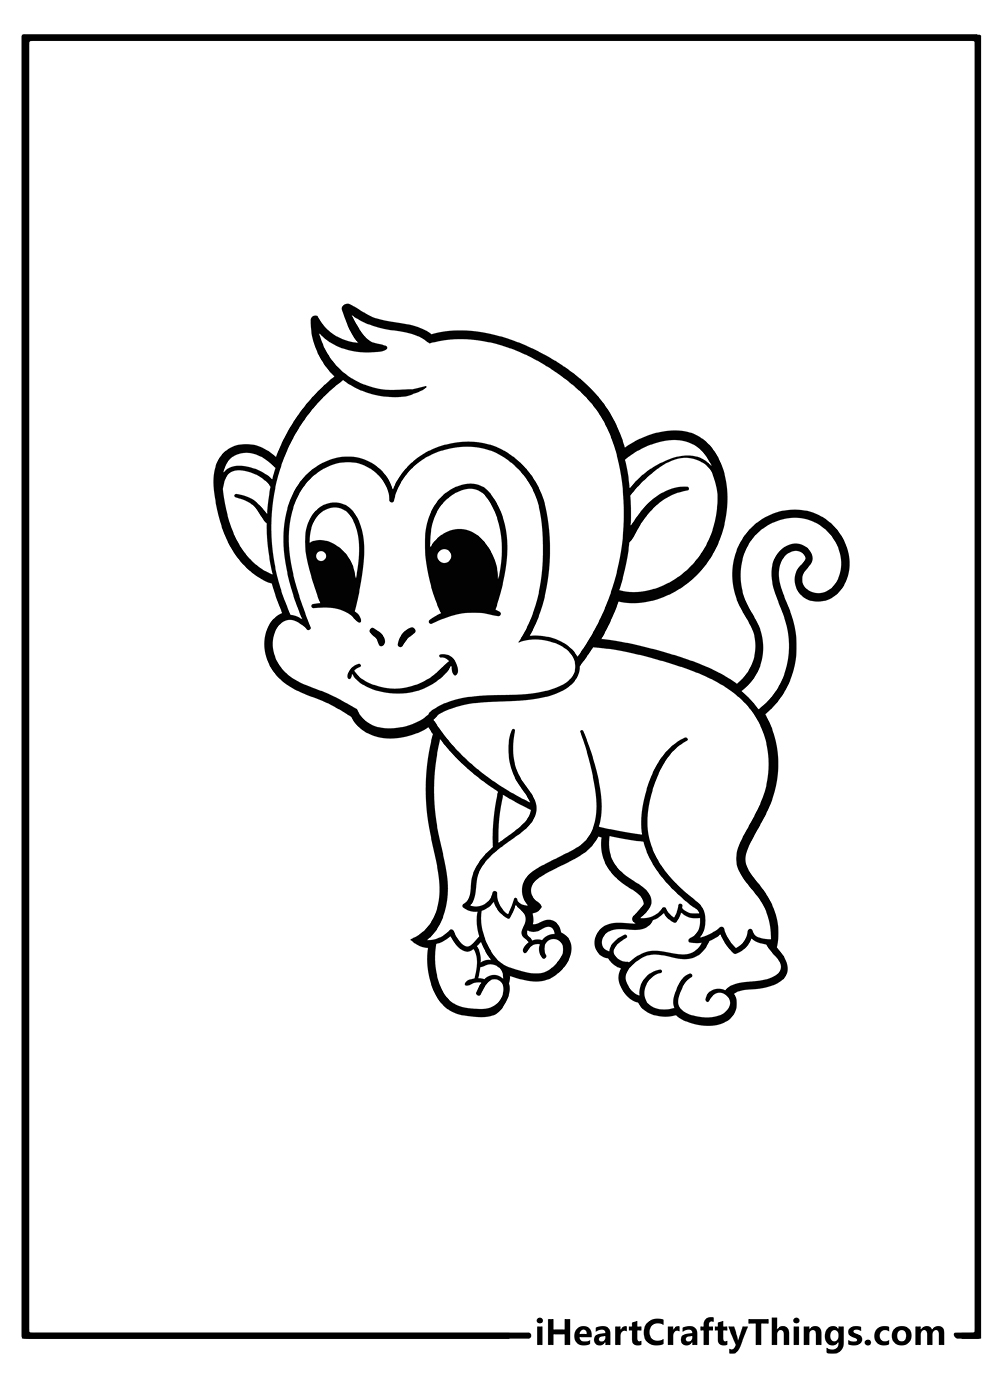 Printable Monkey Coloring Pages Updated 14